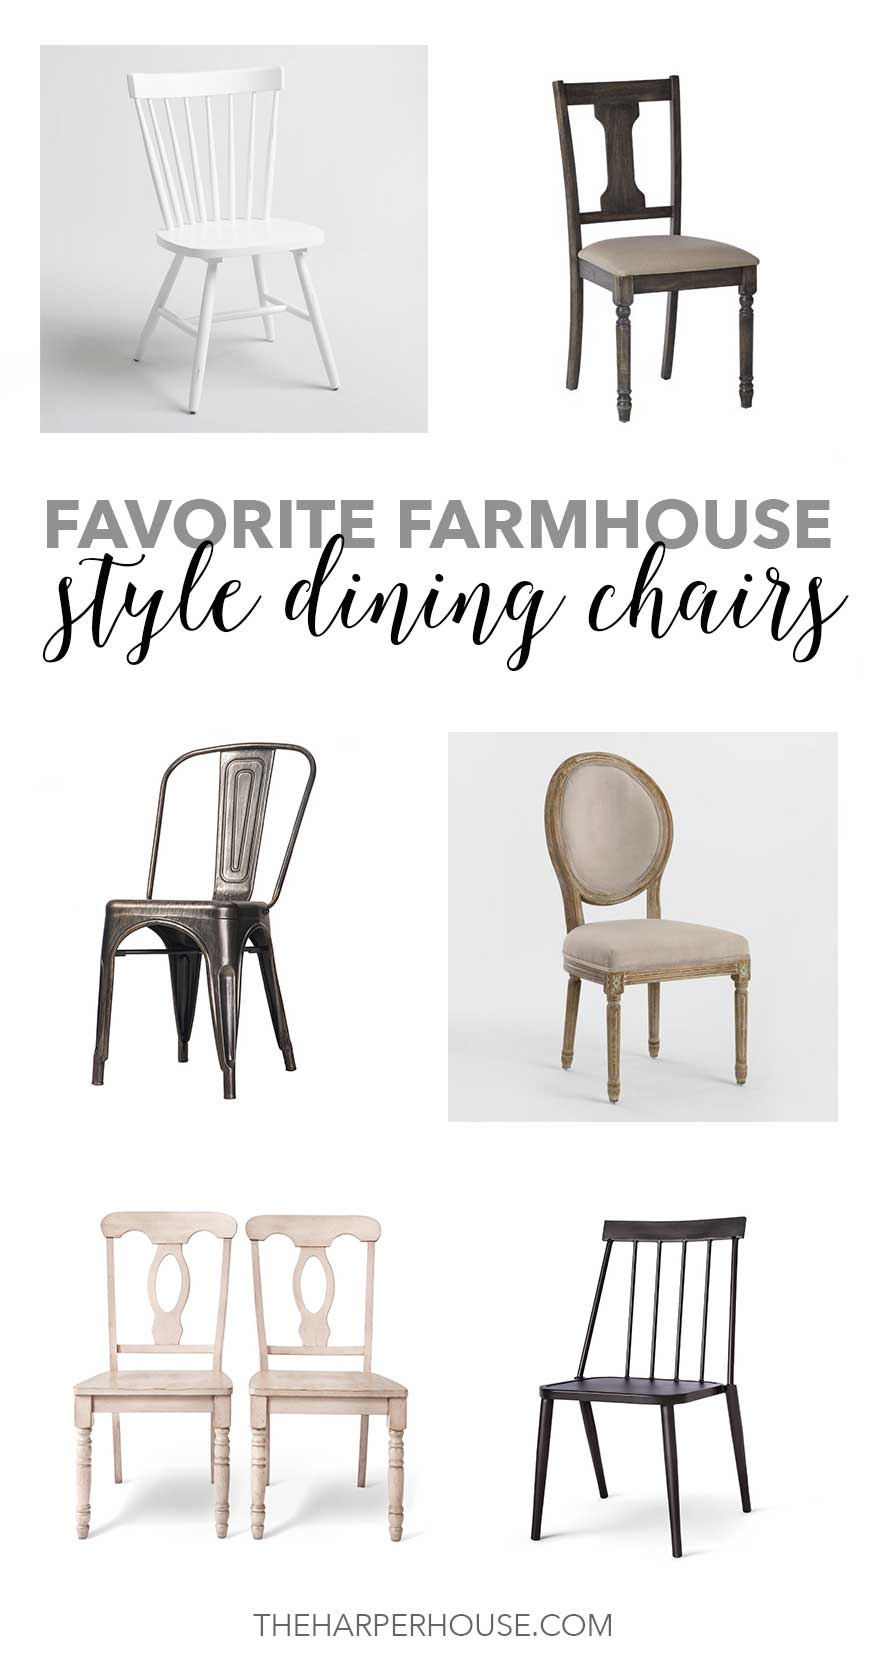 Farmhouse Dining Chairs, so many beautiful budget-friendly options!